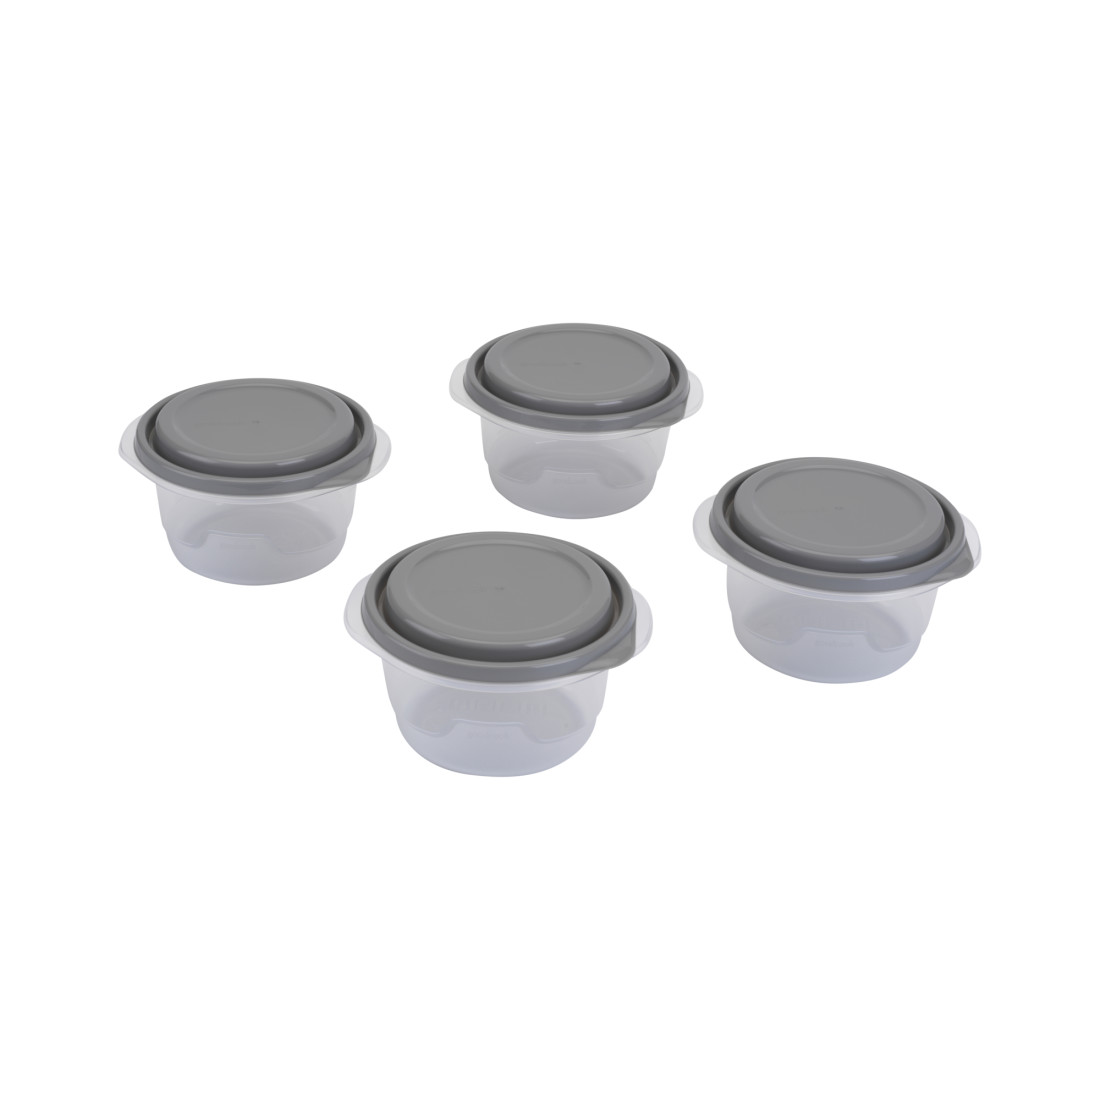 3.2-Cup Food Container, small bowl, 4-Piece Set - GoodCook